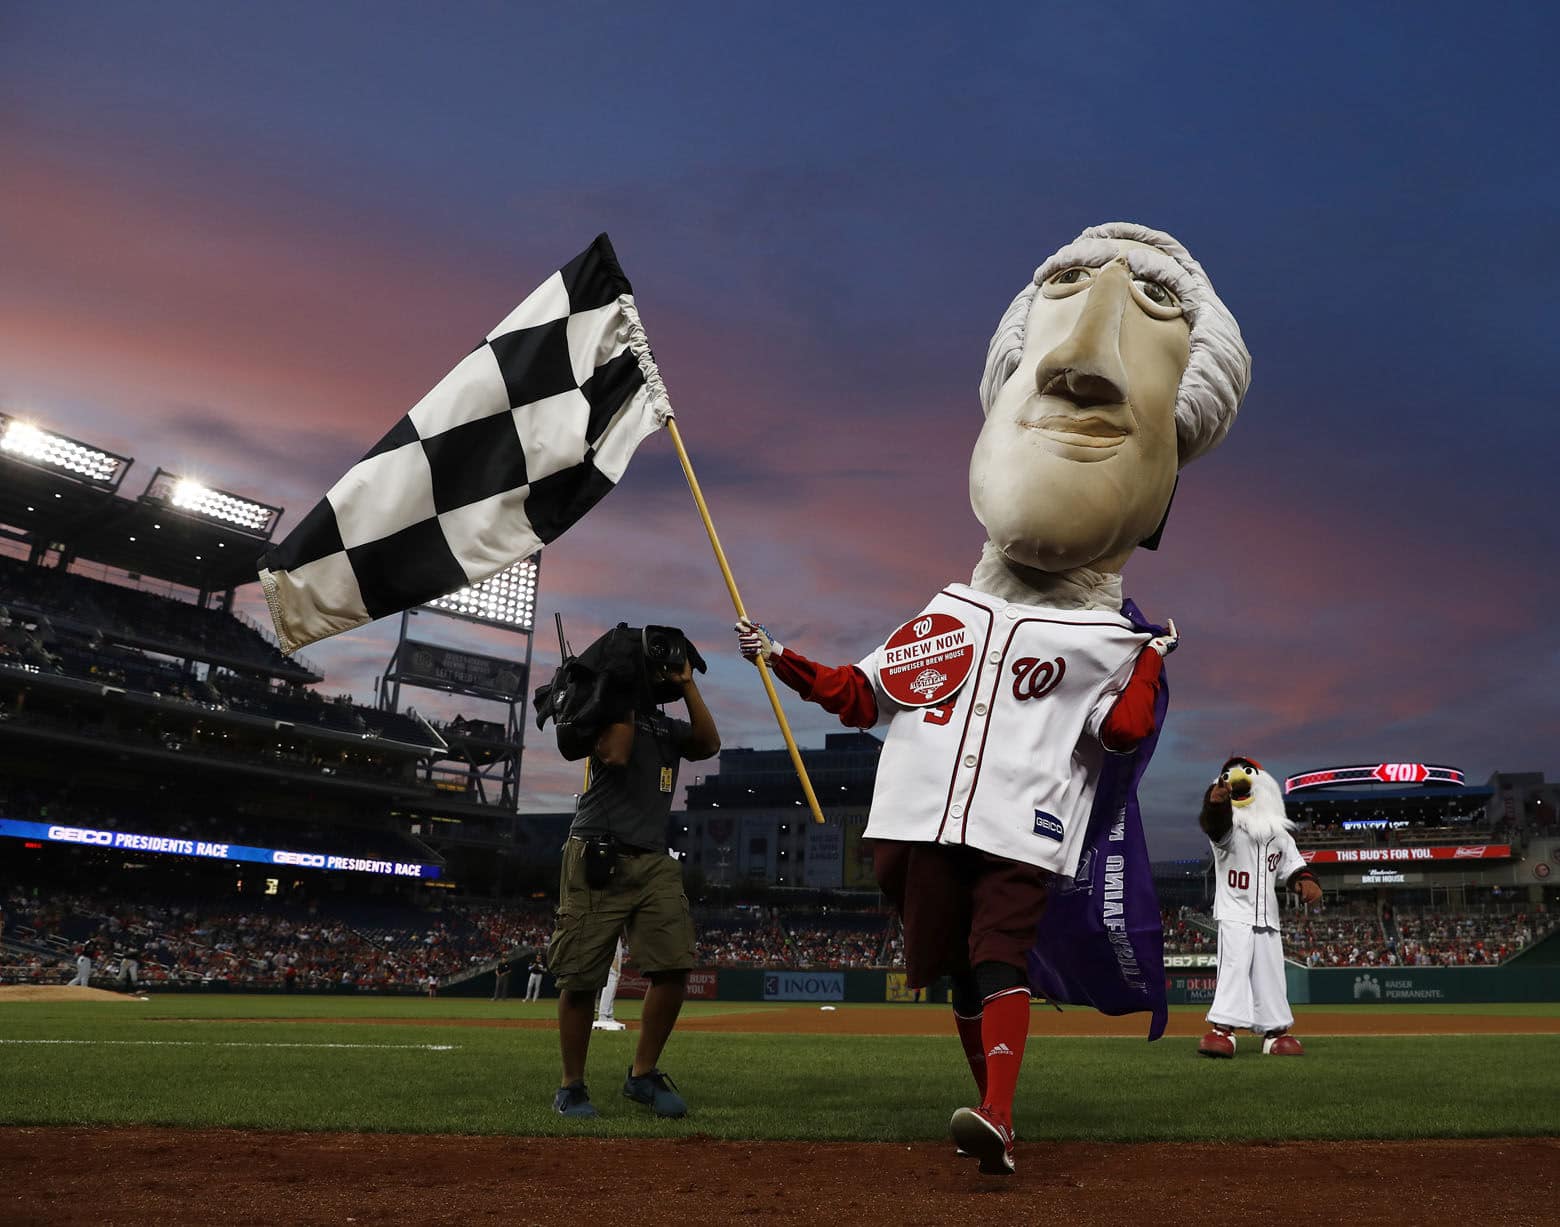 Washington Nationals racing presidents mascot Thomas Jefferson wins the race during the fourth inning of a baseball game between the Nationals and the Miami Marlins, Thursday, Aug. 10, 2017, in Washington. The Nationals won 3-2. (AP Photo/Carolyn Kaster)